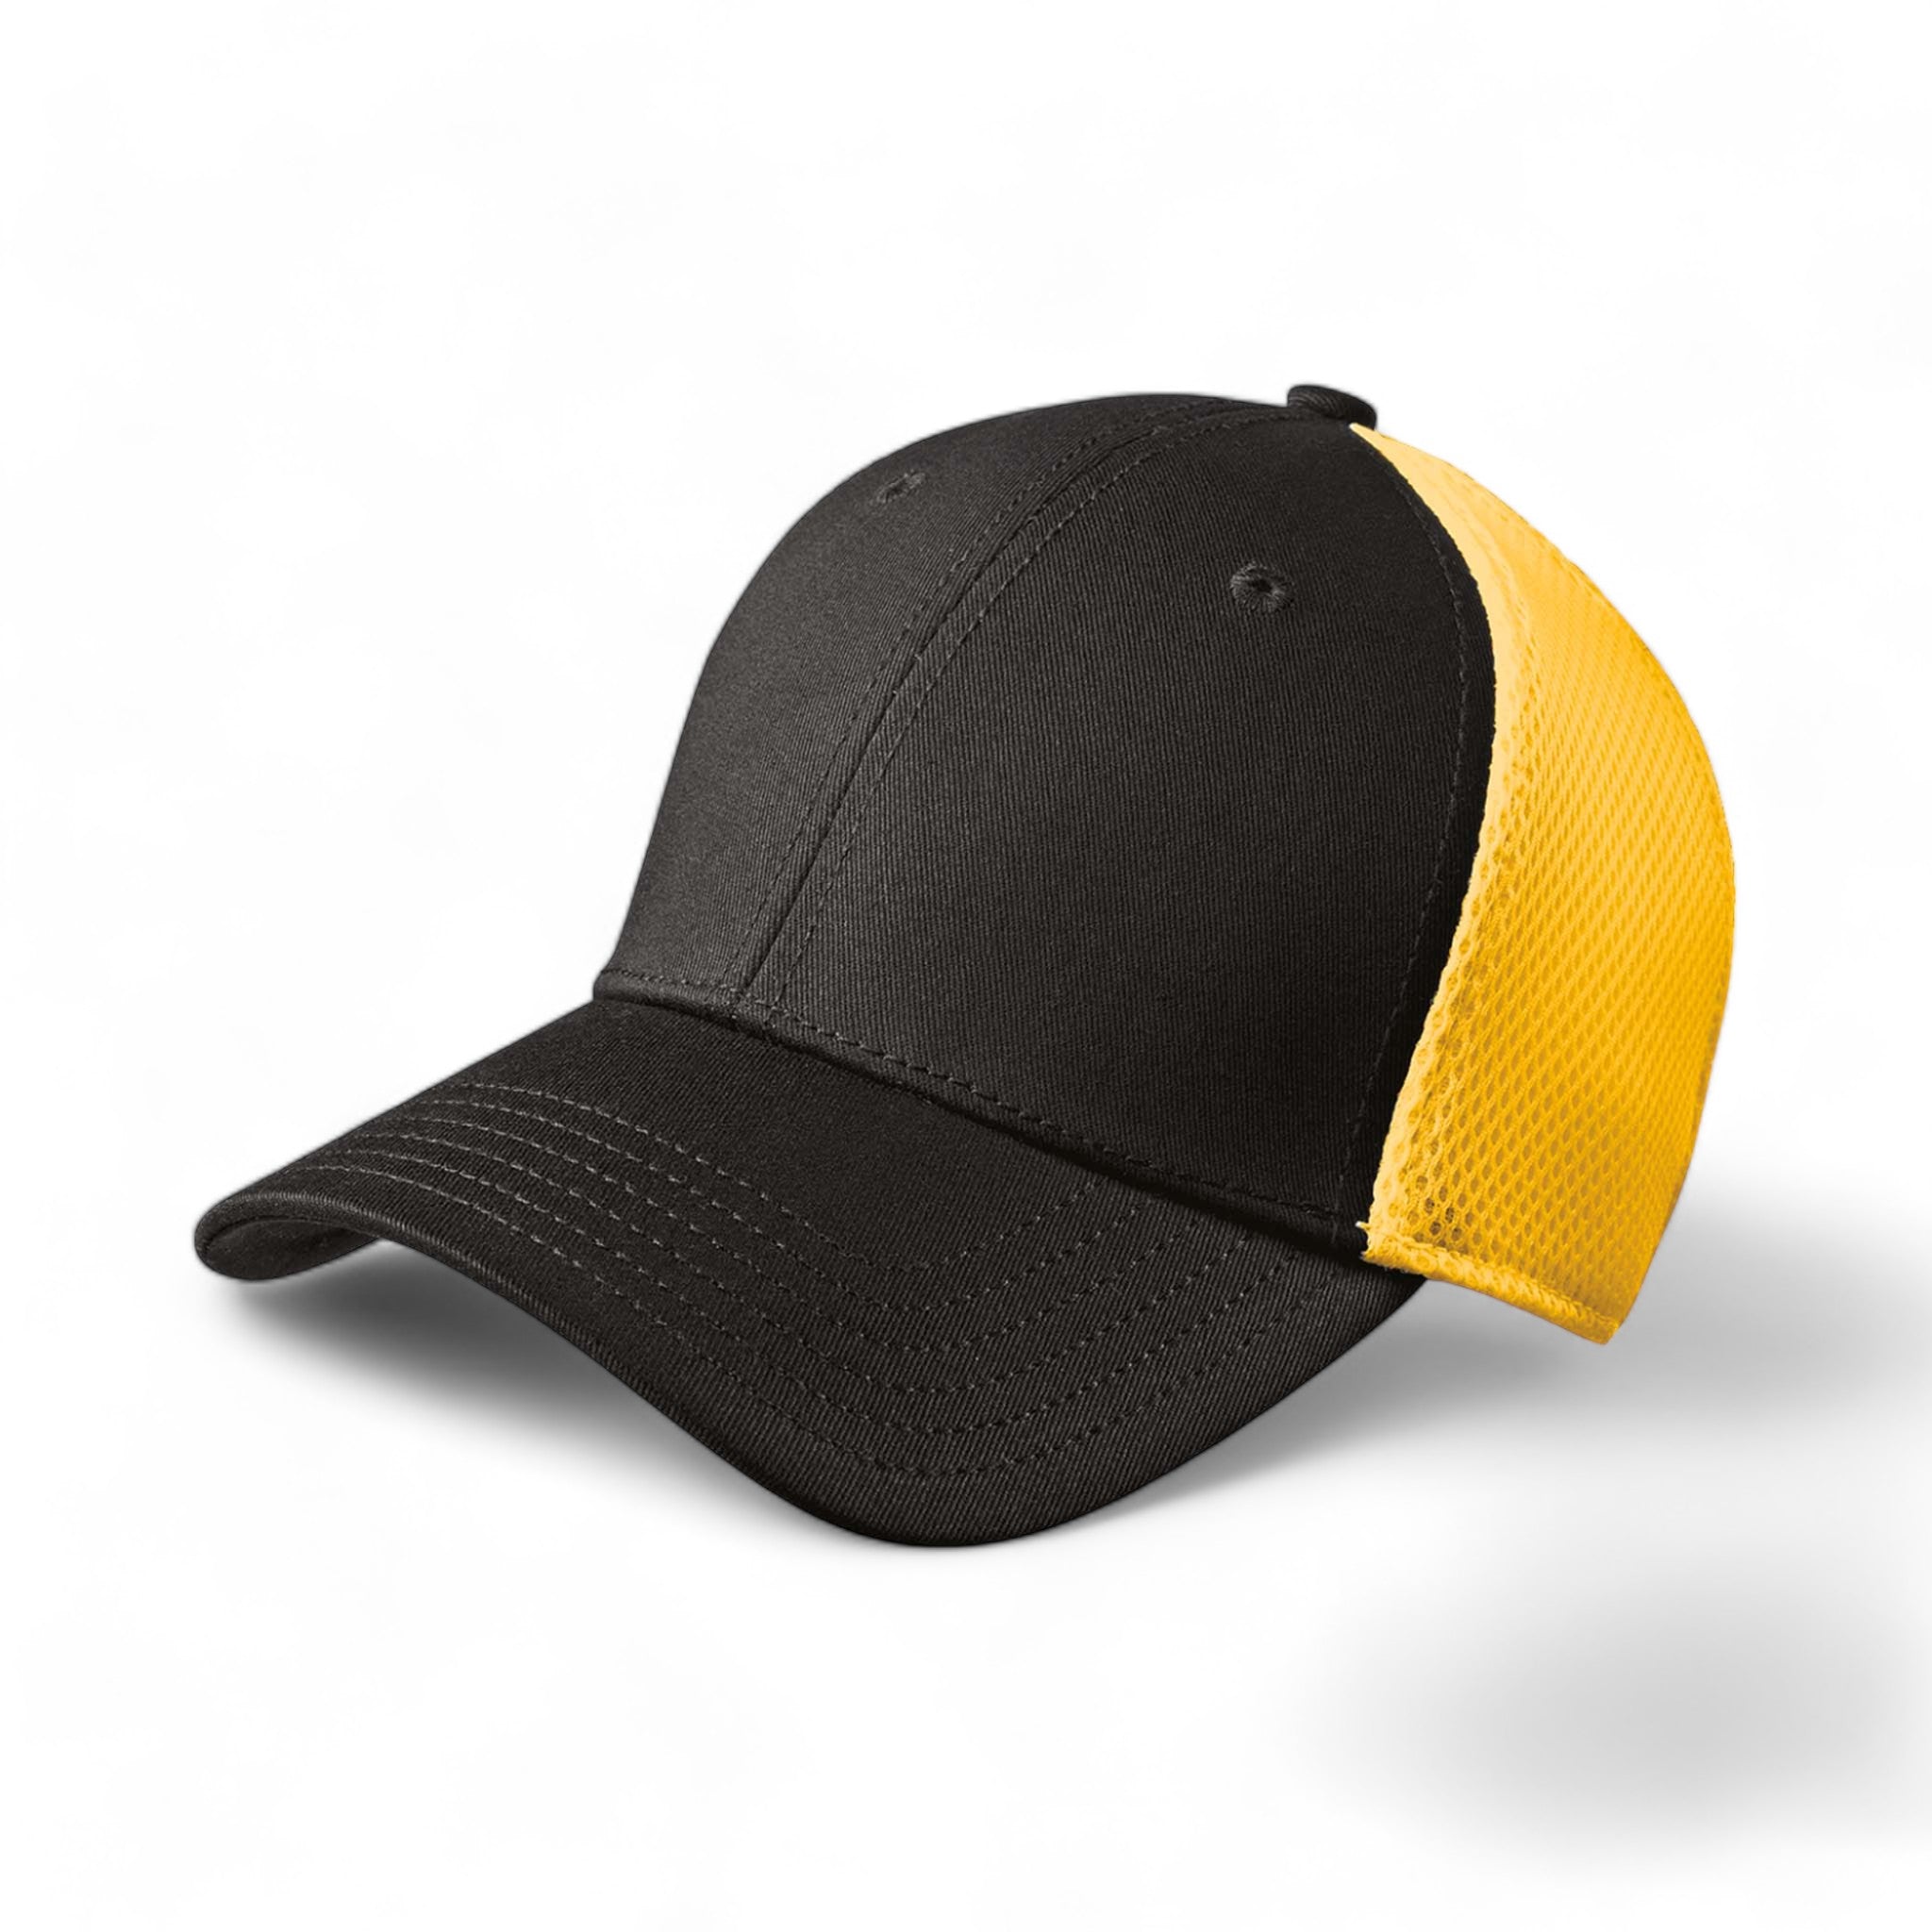 Side view of New Era NE1020 custom hat in black and gold